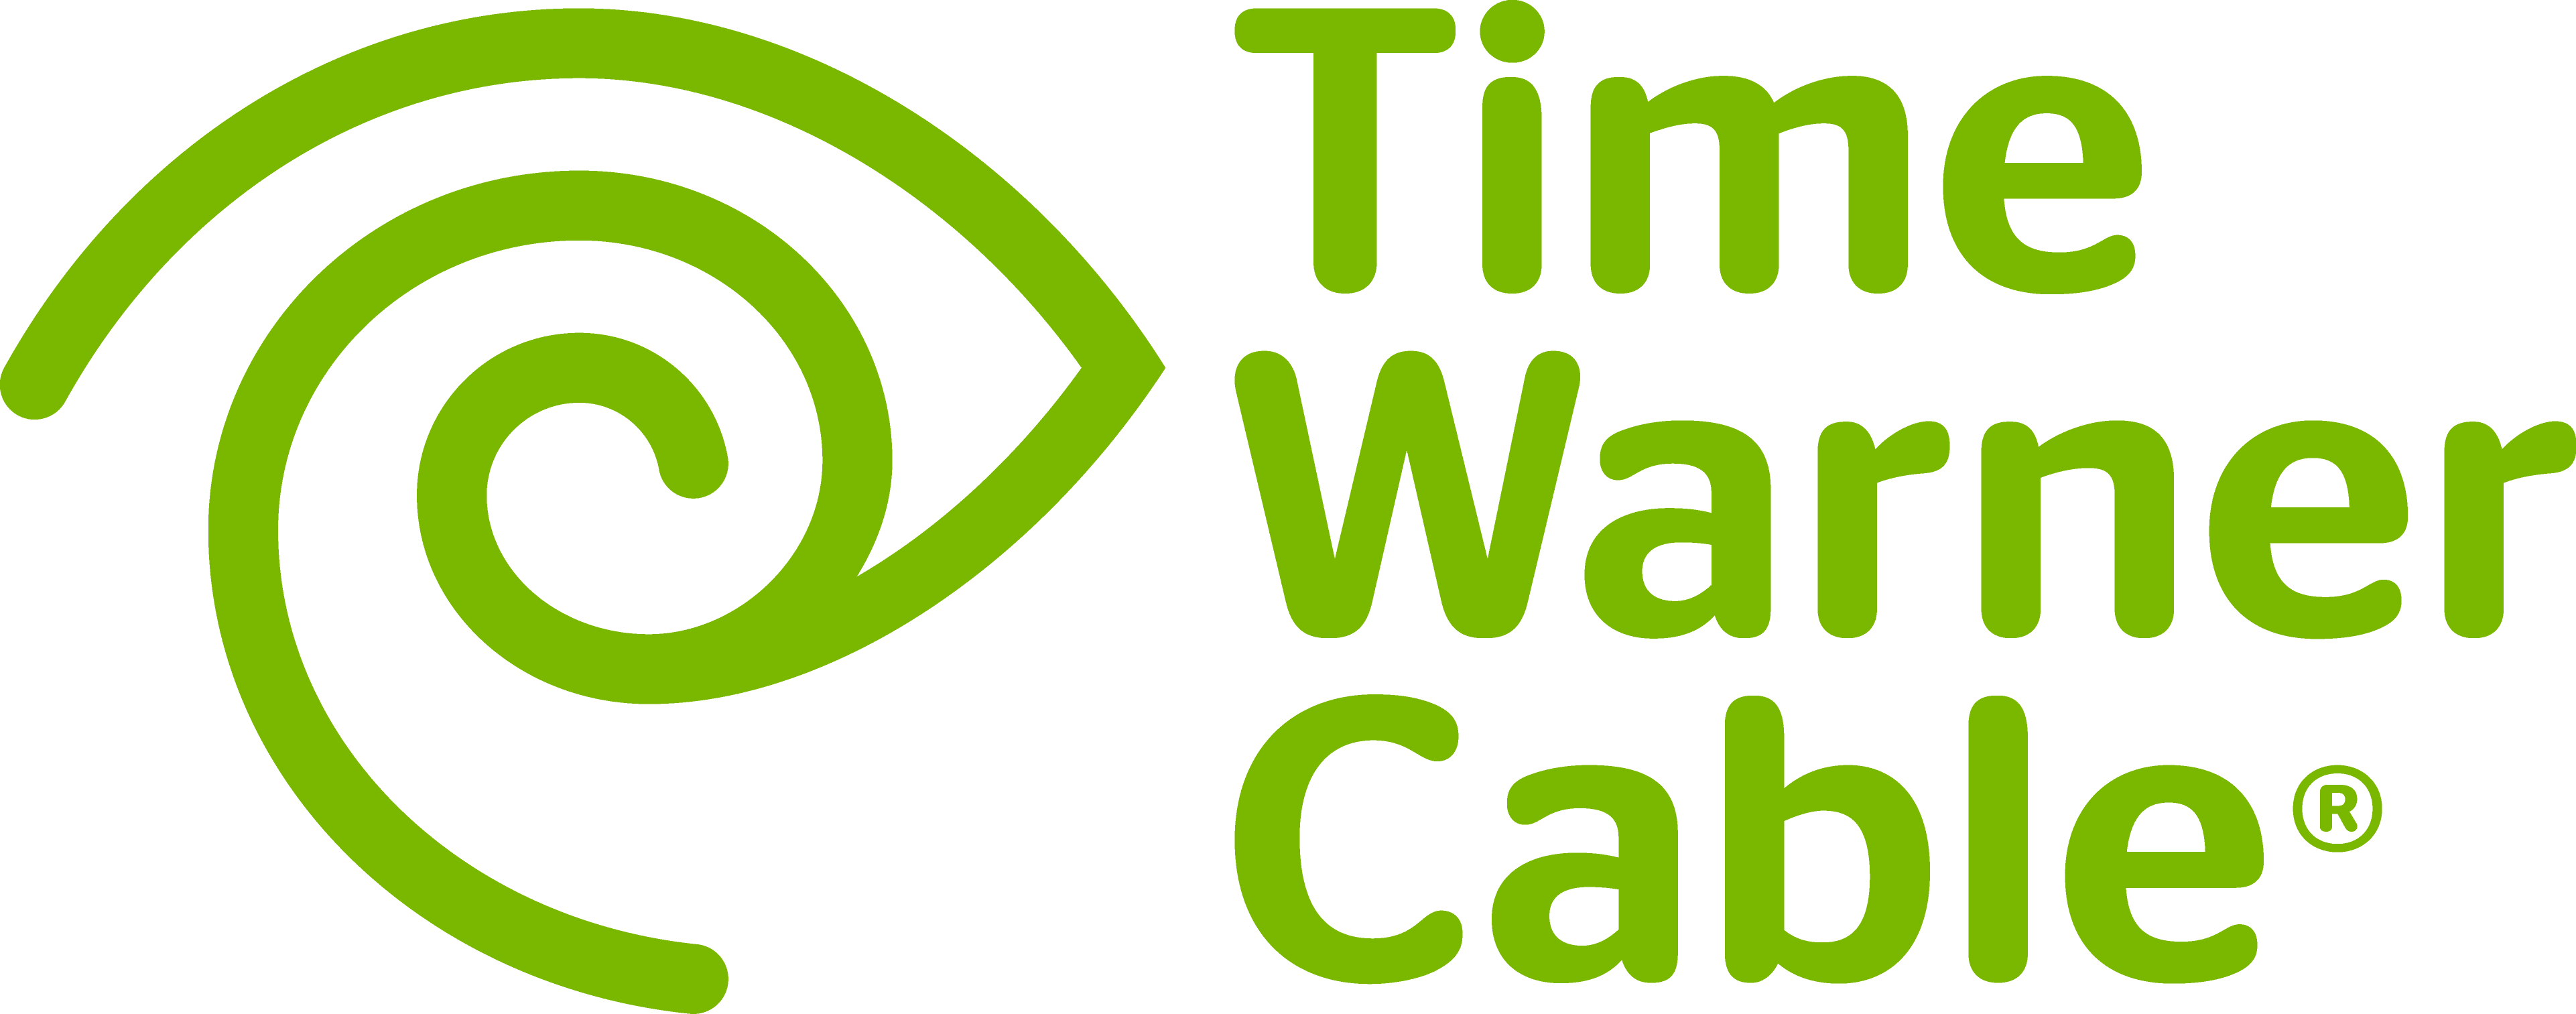 Xbox Just Announced A Landmark Deal With Time Warner - Time Warner Cable Logo Png (3844x1513), Png Download